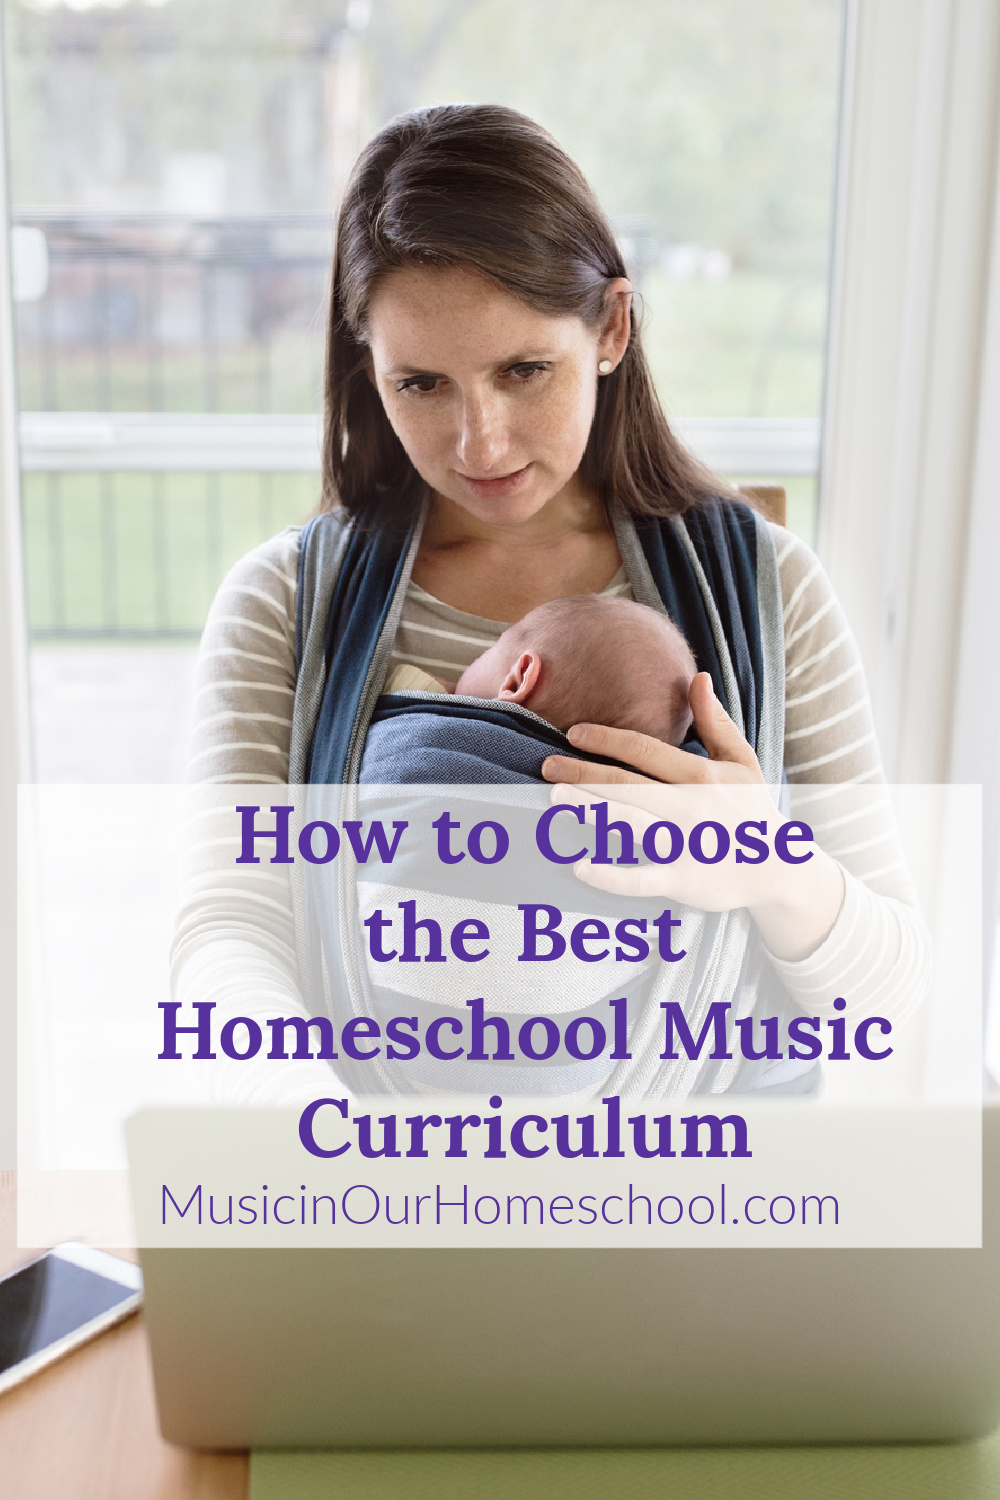 How to Choose the Best Homeschool Music Curriculum